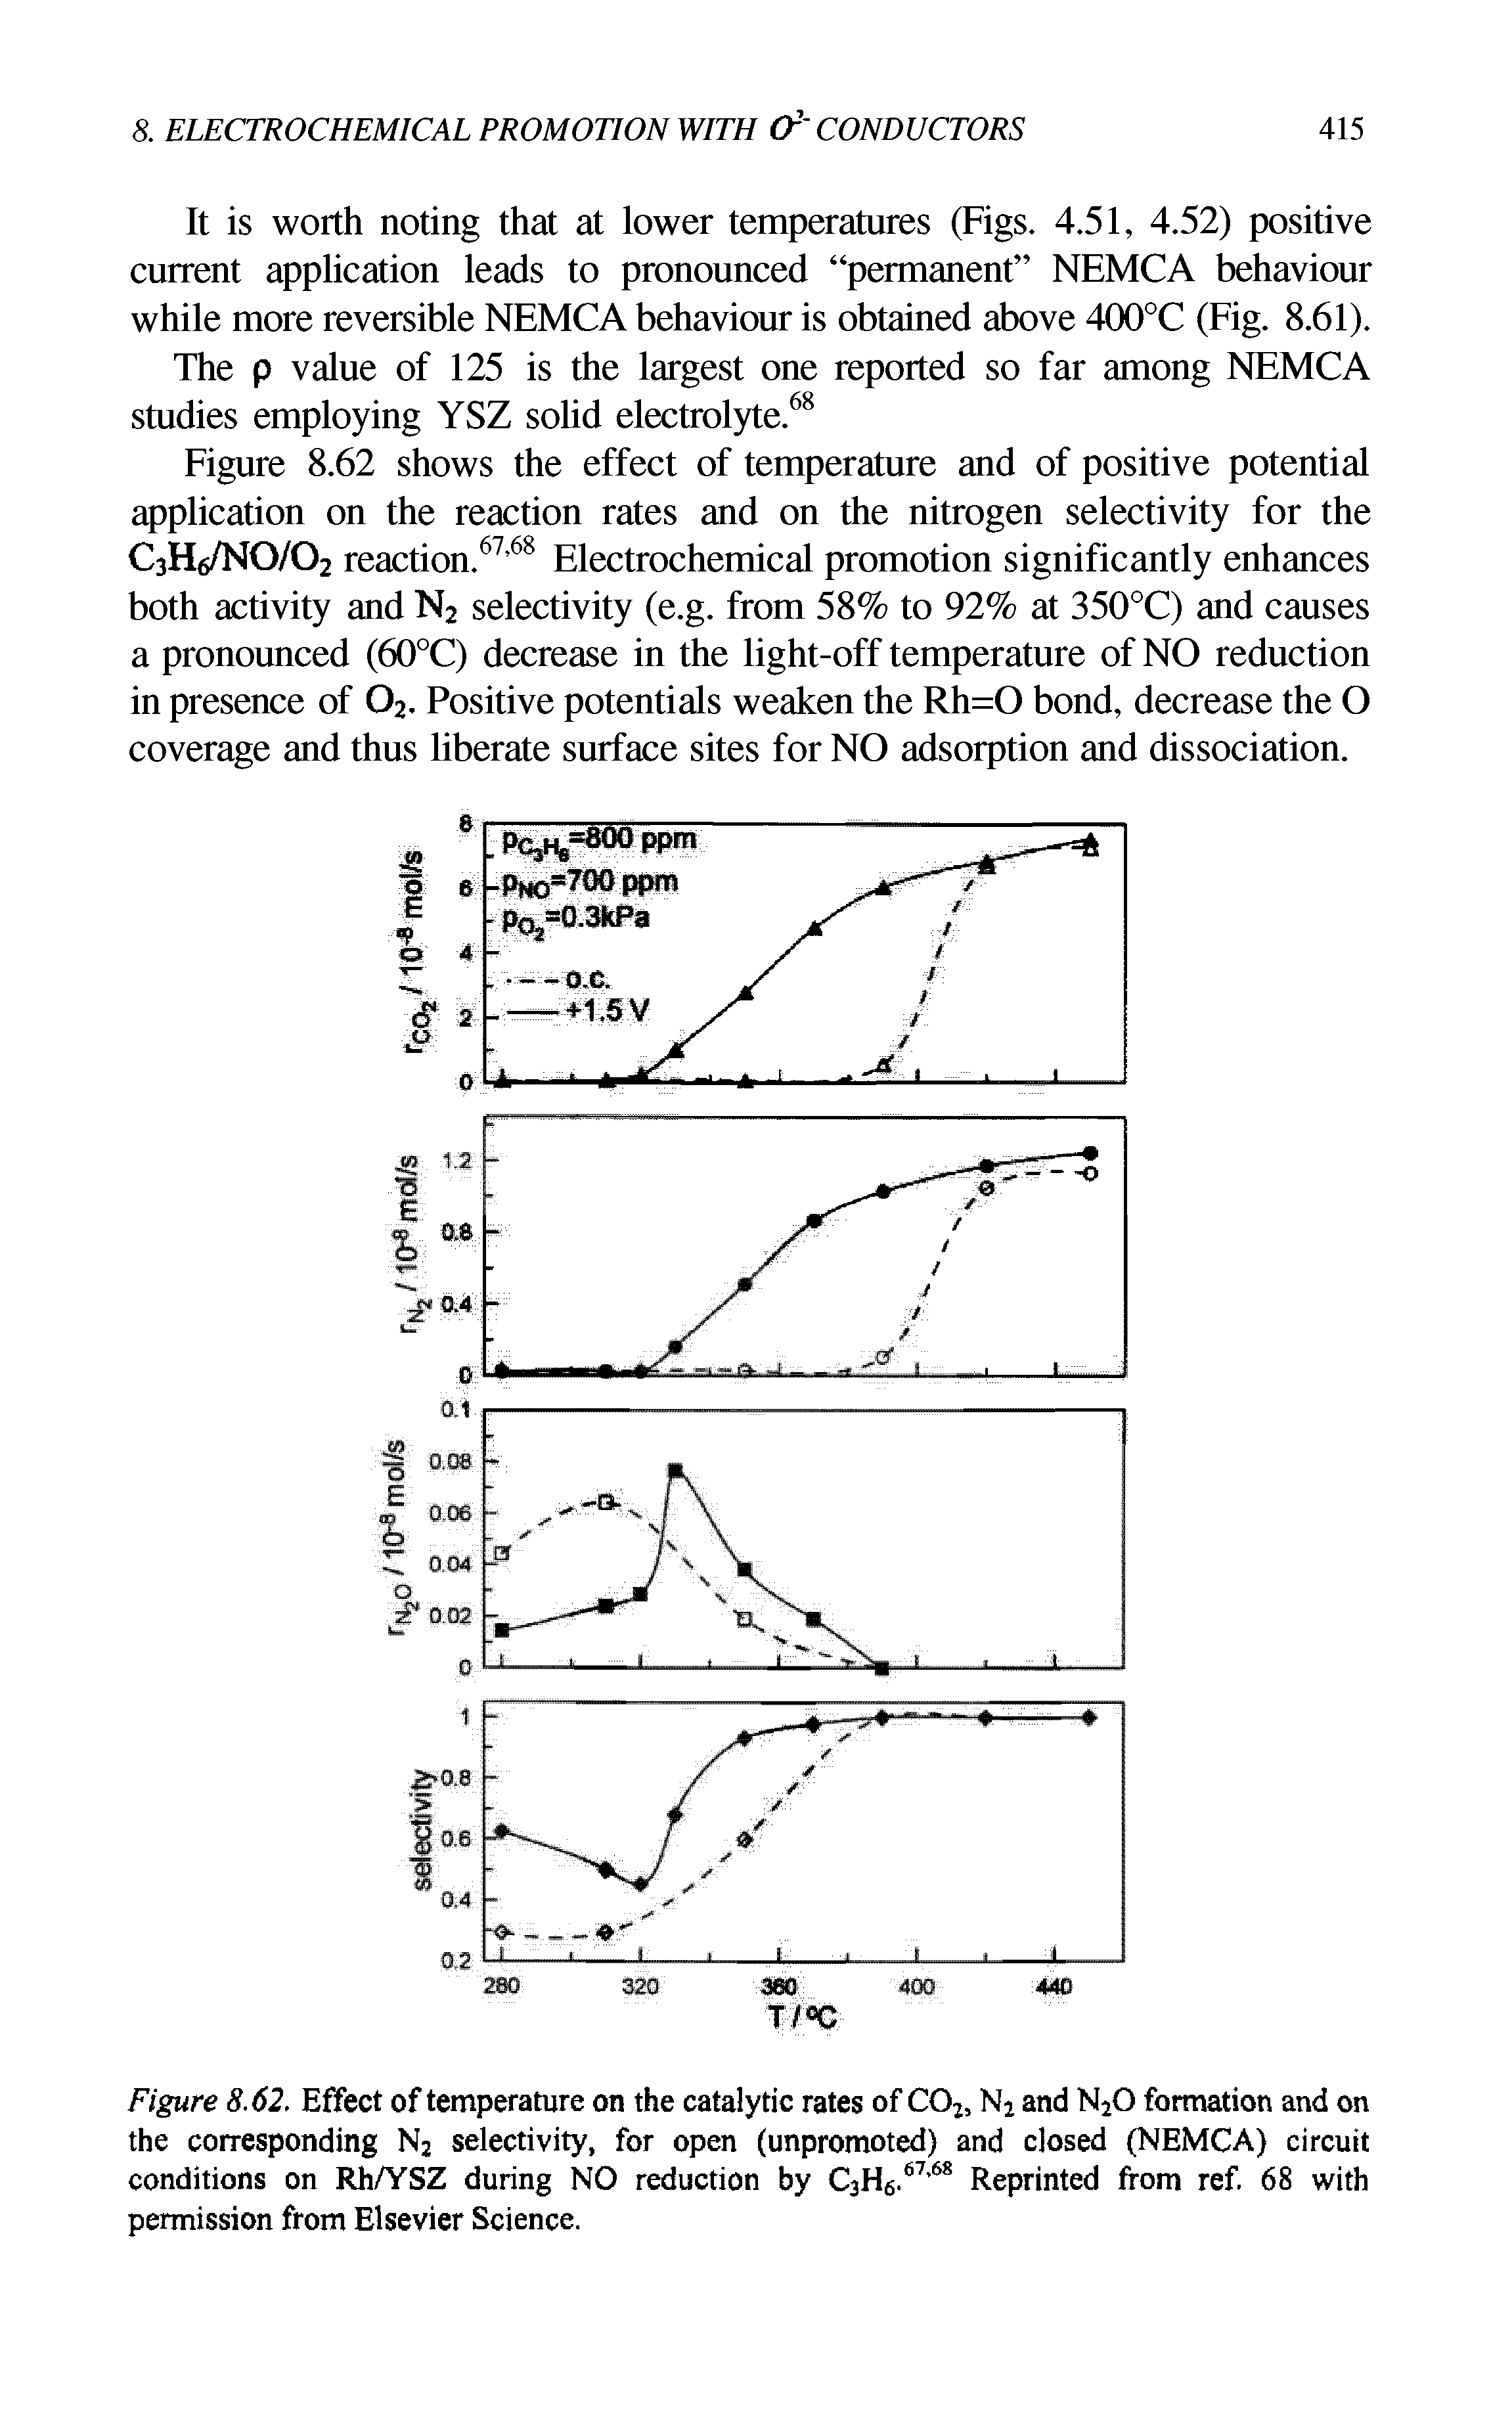 Figure 8.62, Effect of temperature on the catalytic rates of C02, N2 and N20 formation and on the corresponding N2 selectivity, for open (unpromoted) and closed (NEMCA) circuit conditions on Rh/YSZ during NO reduction by C3H6.67,68 Reprinted from ref. 68 with permission from Elsevier Science.